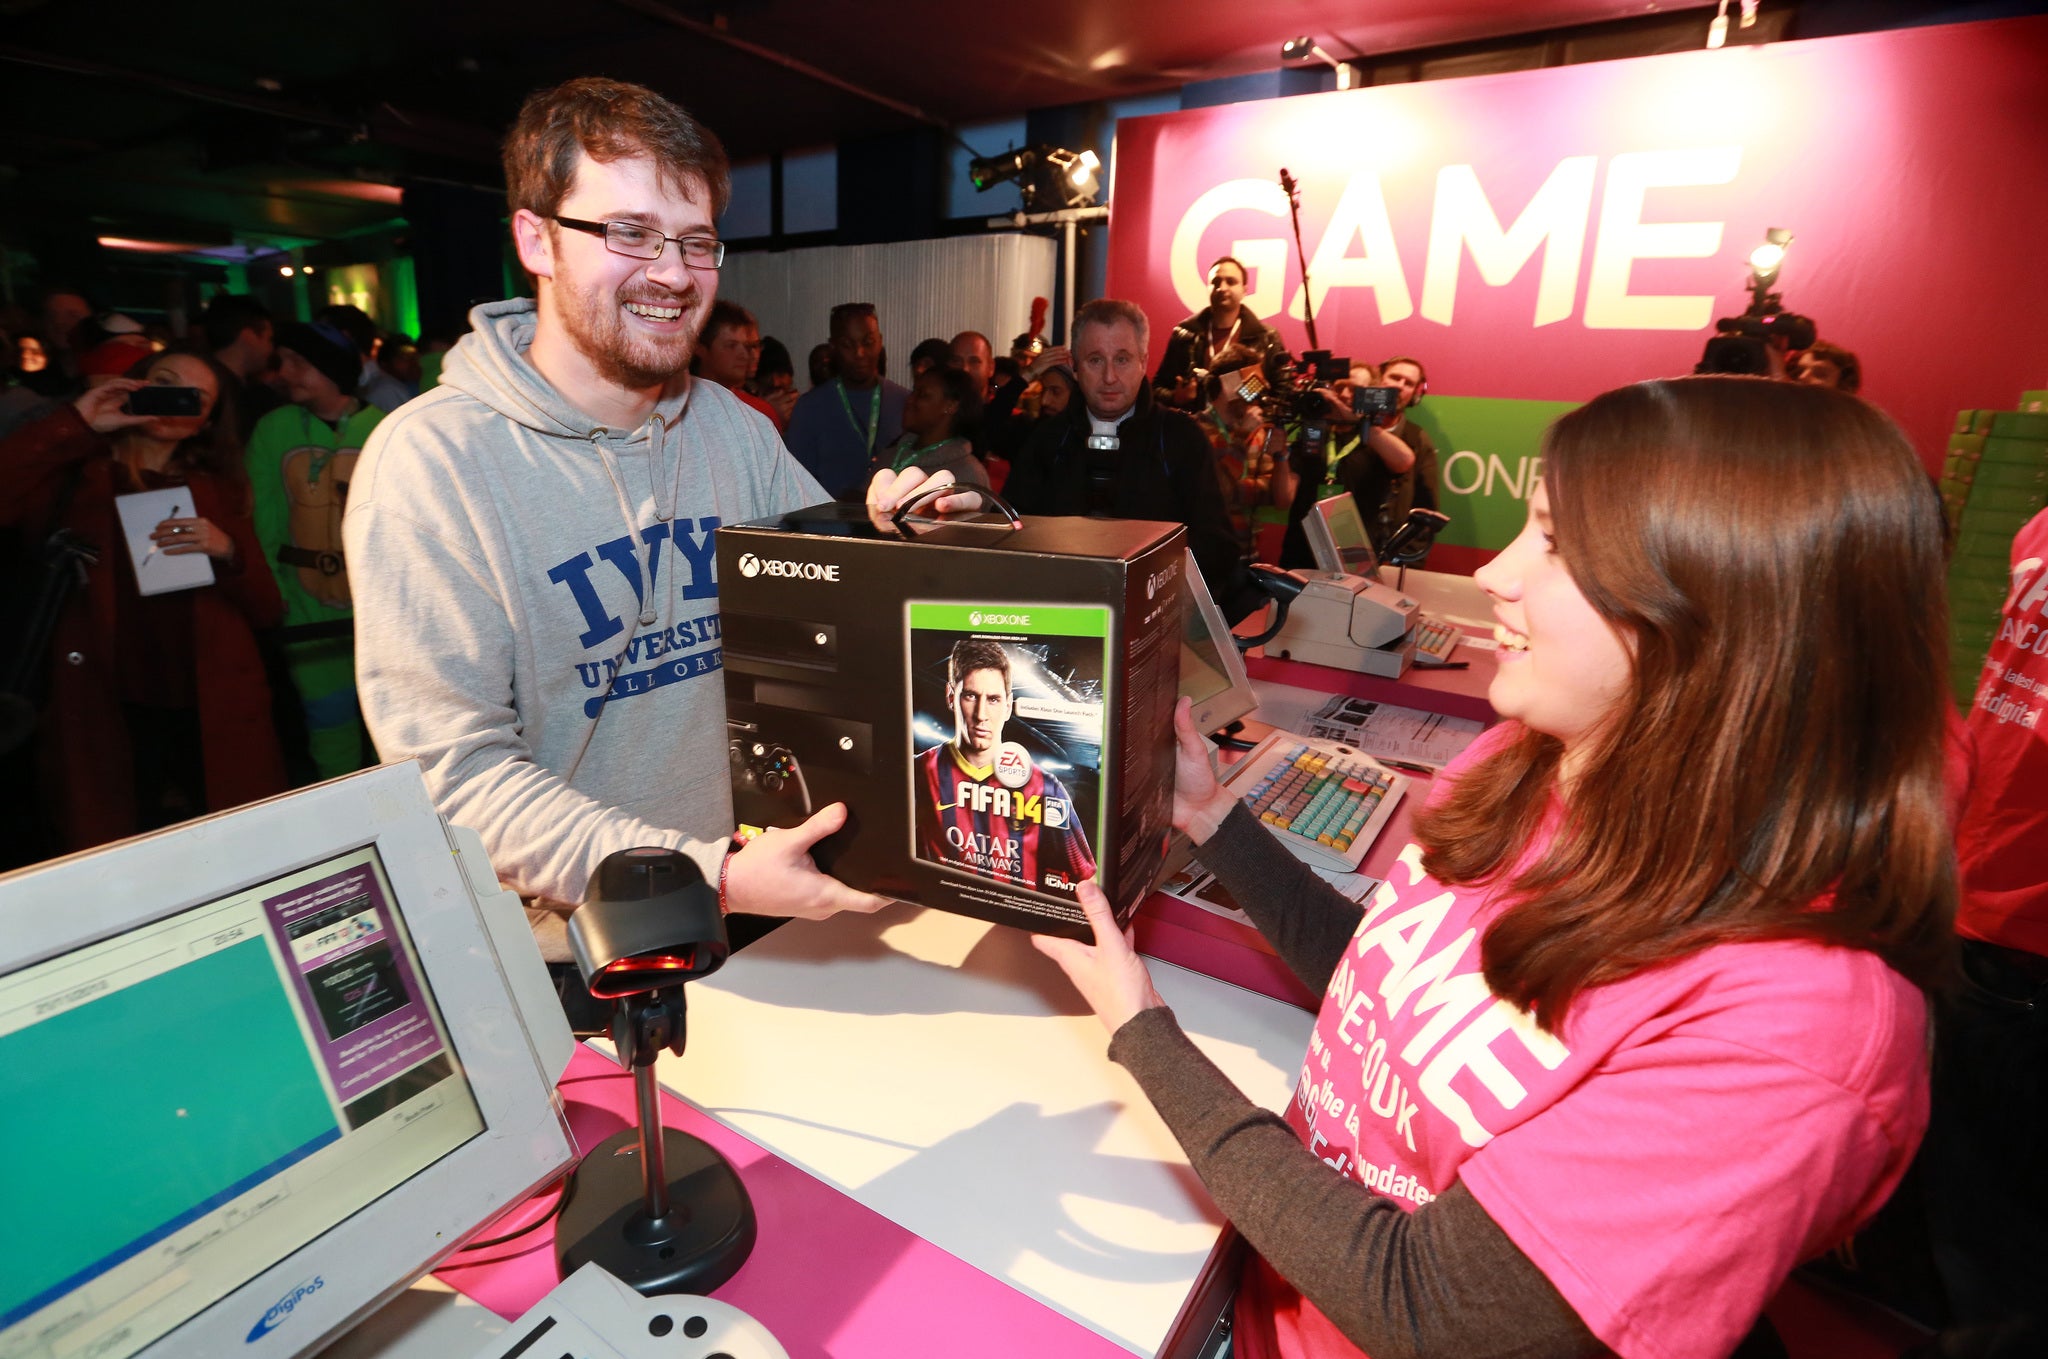 In the UK, 26-year-old Charlie Pulbrook was the first customer to buy the Xbox One from GAME's pop up store in the Trocadero, London.